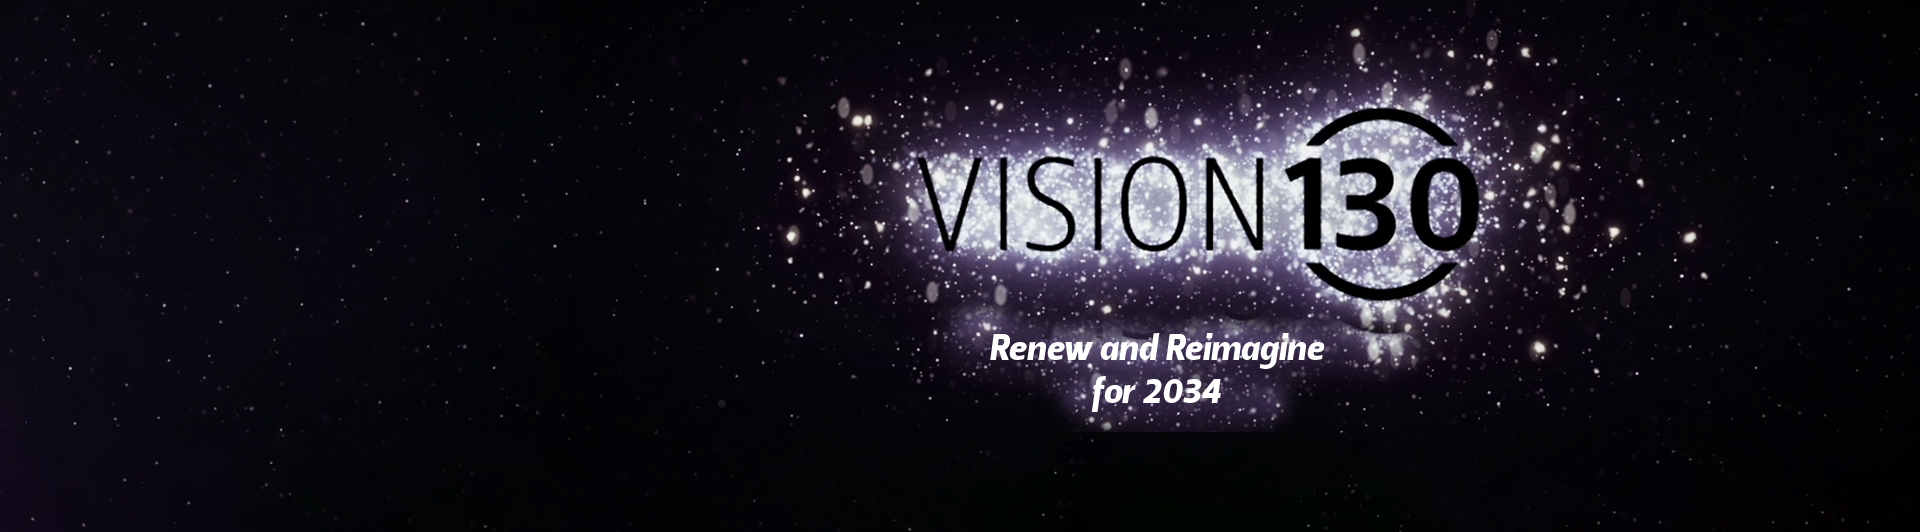 Vision130 - Renew and Reimagine for 2034